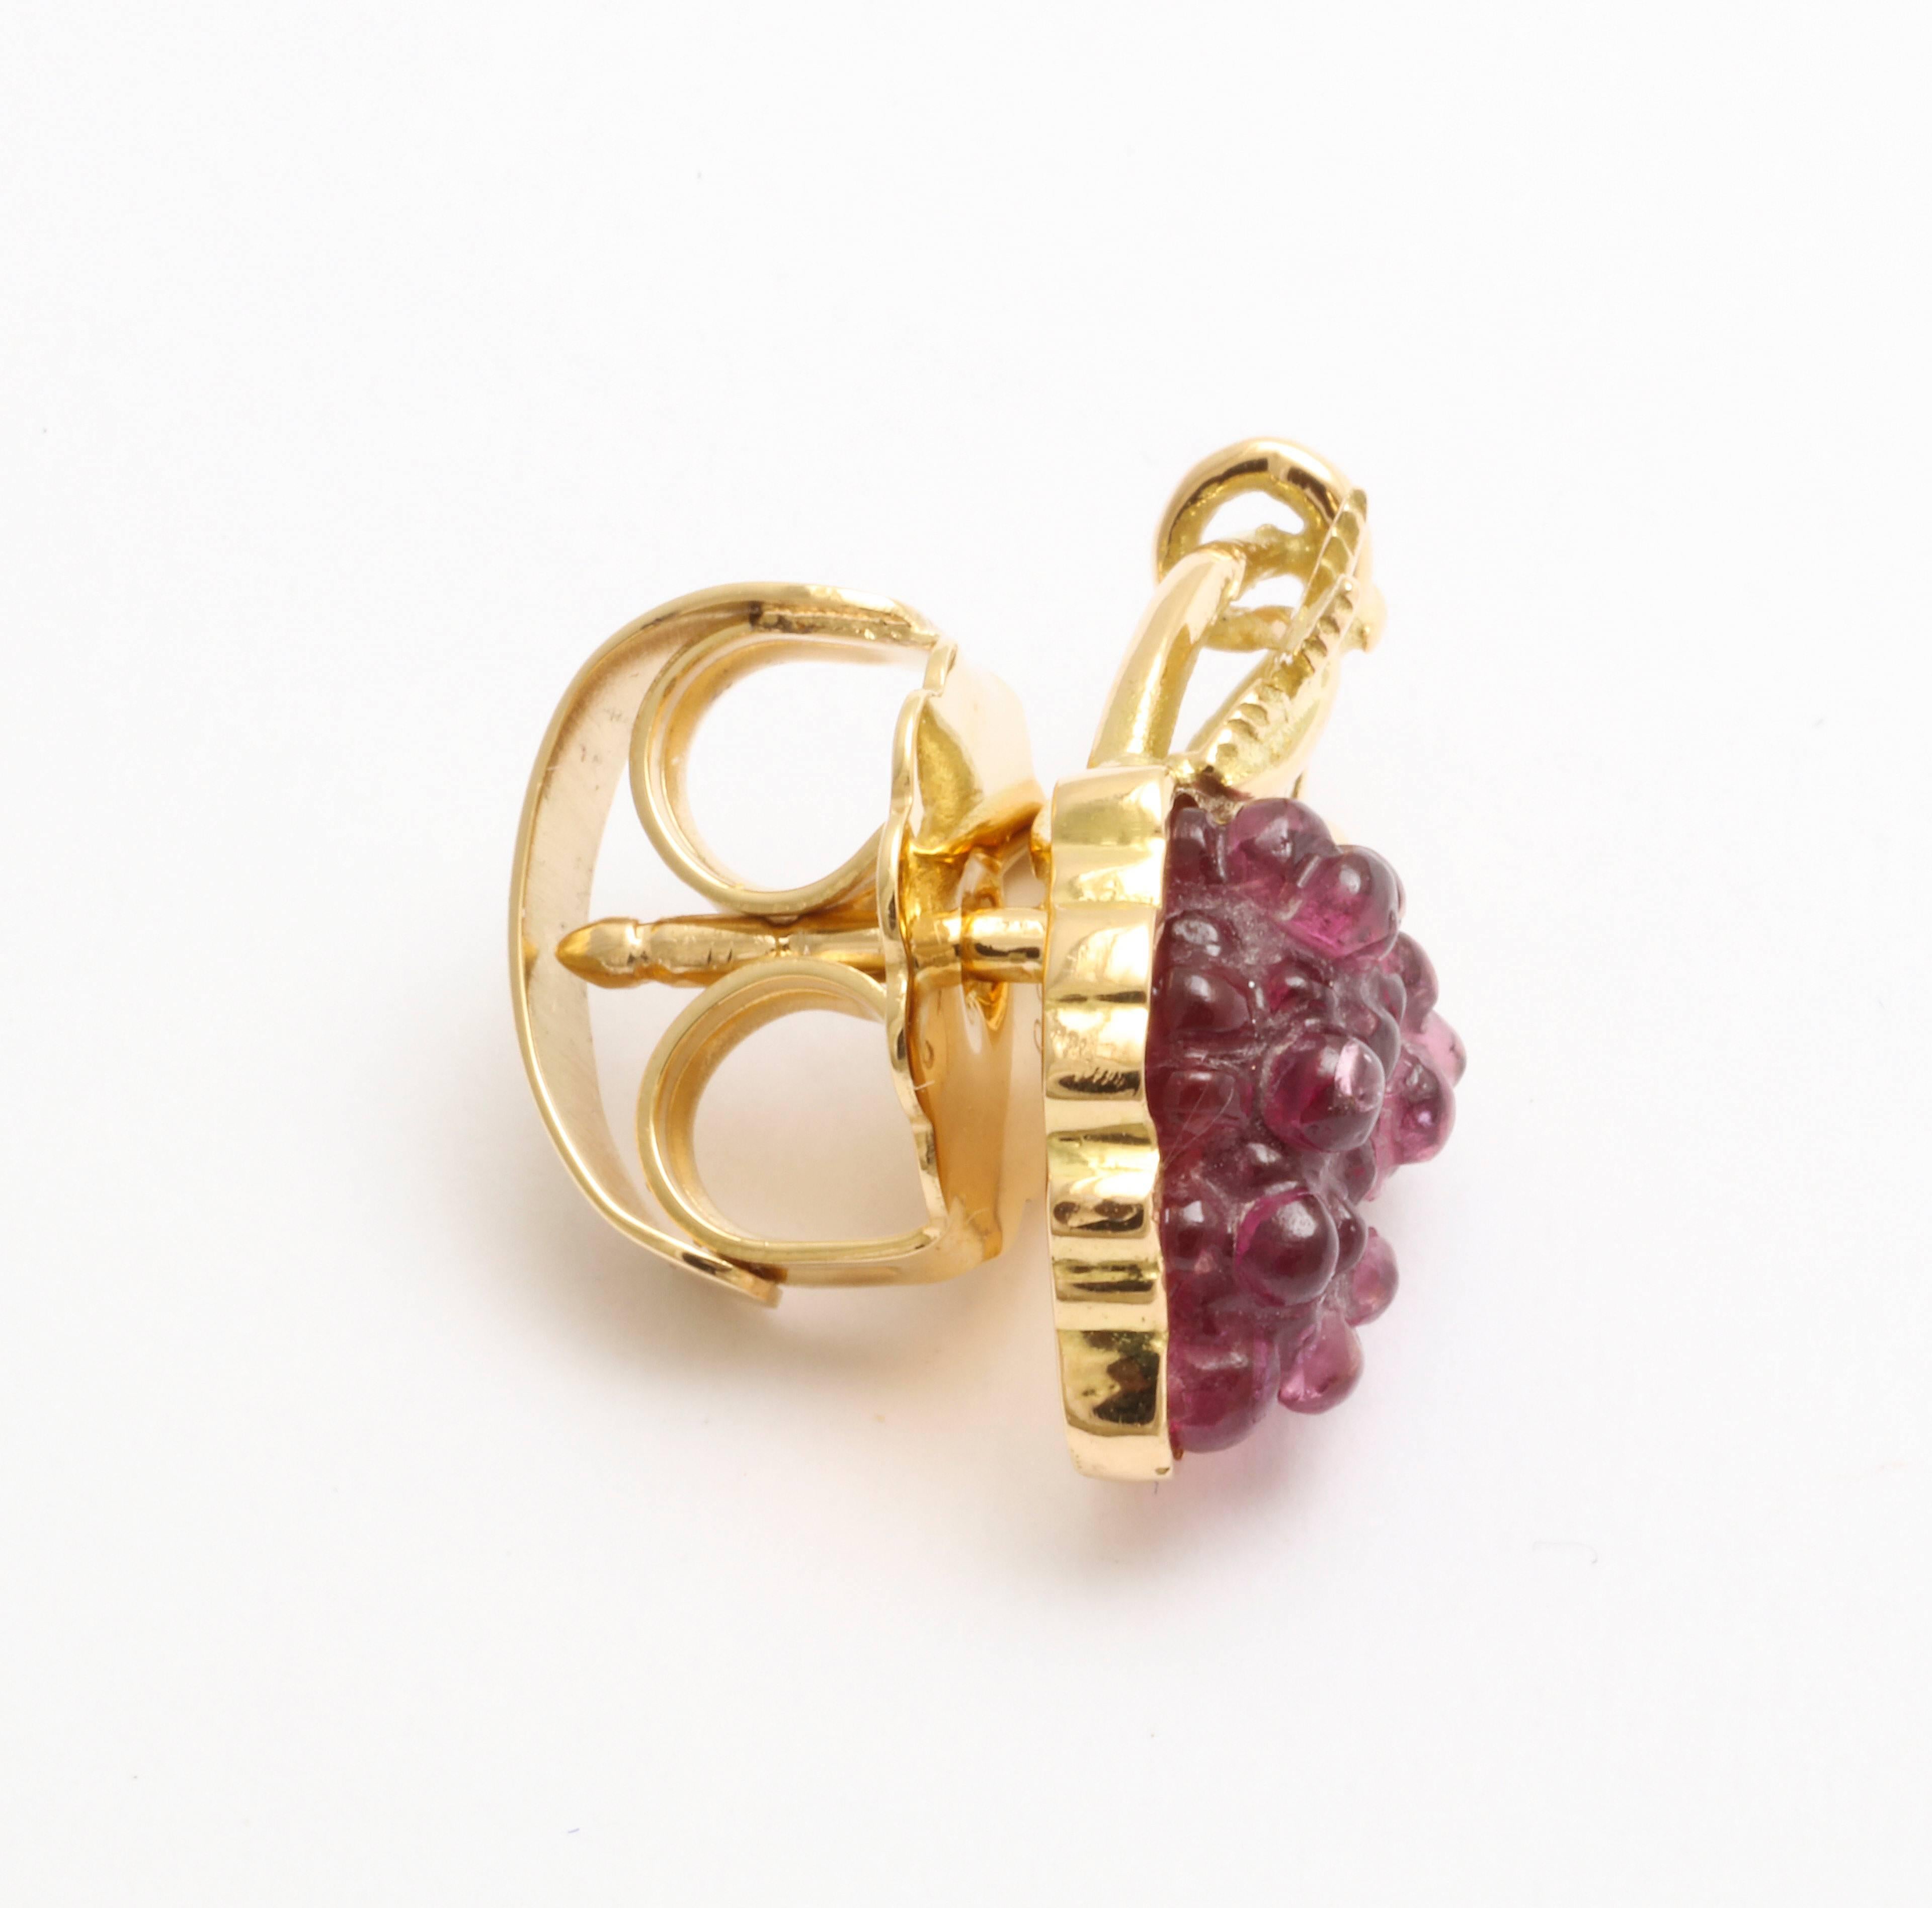 For the wine lover, this cluster of grapes is realistically recreated in 18kt yellow gold and carved pink tourmaline.  

